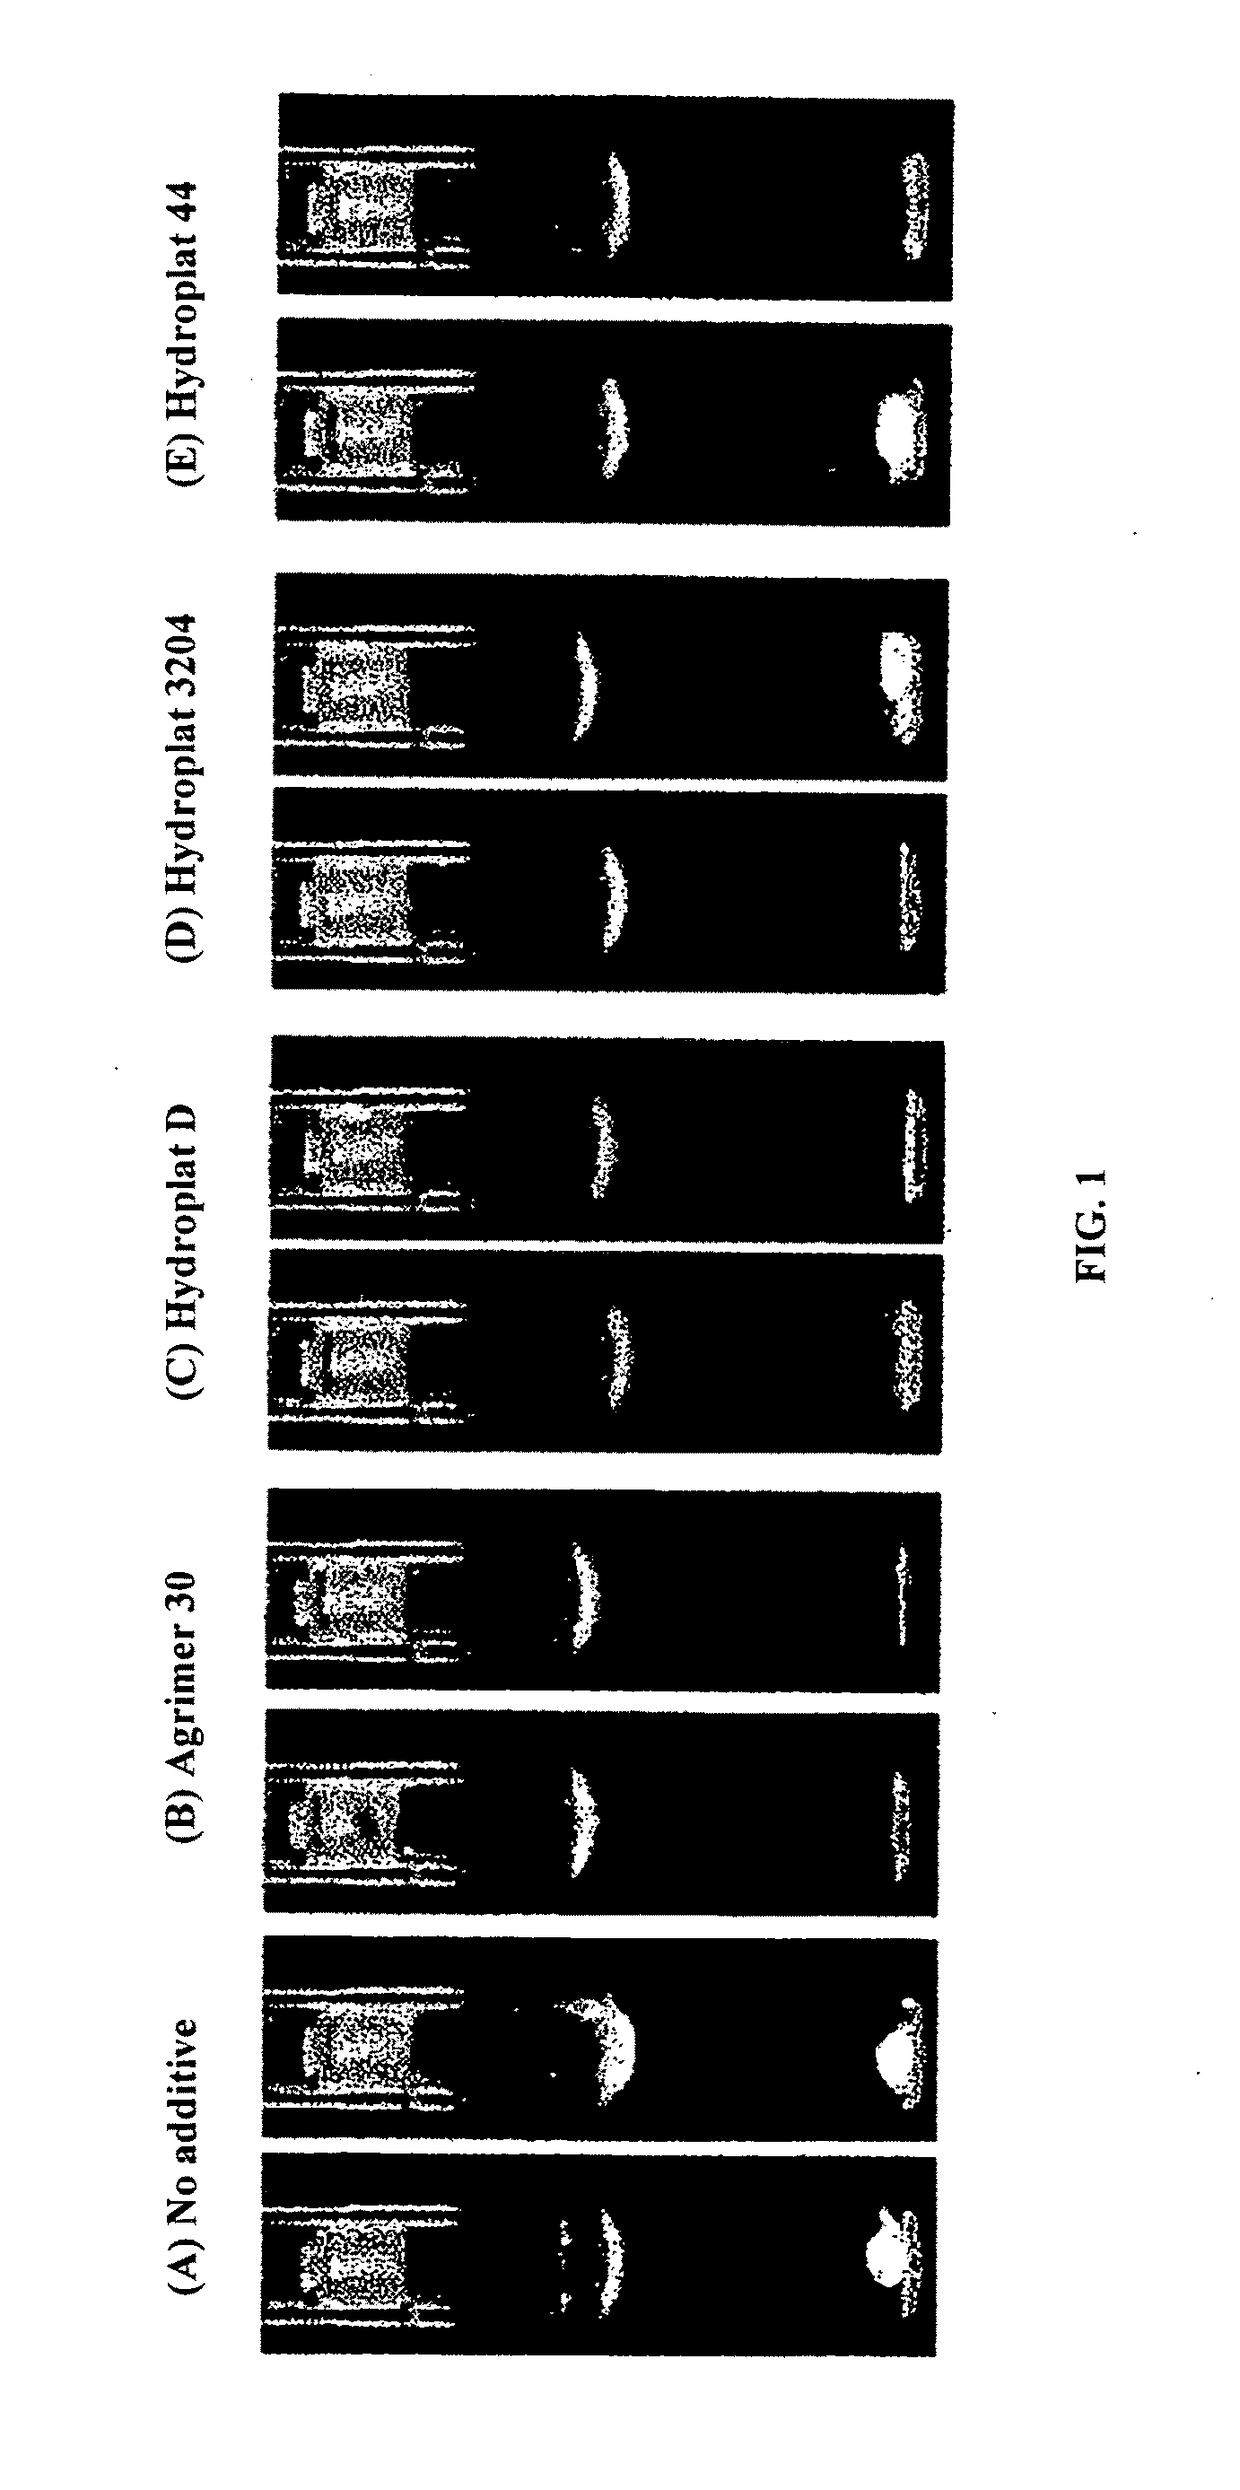 Nitrification inhibitor compositions and methods for preparing the same